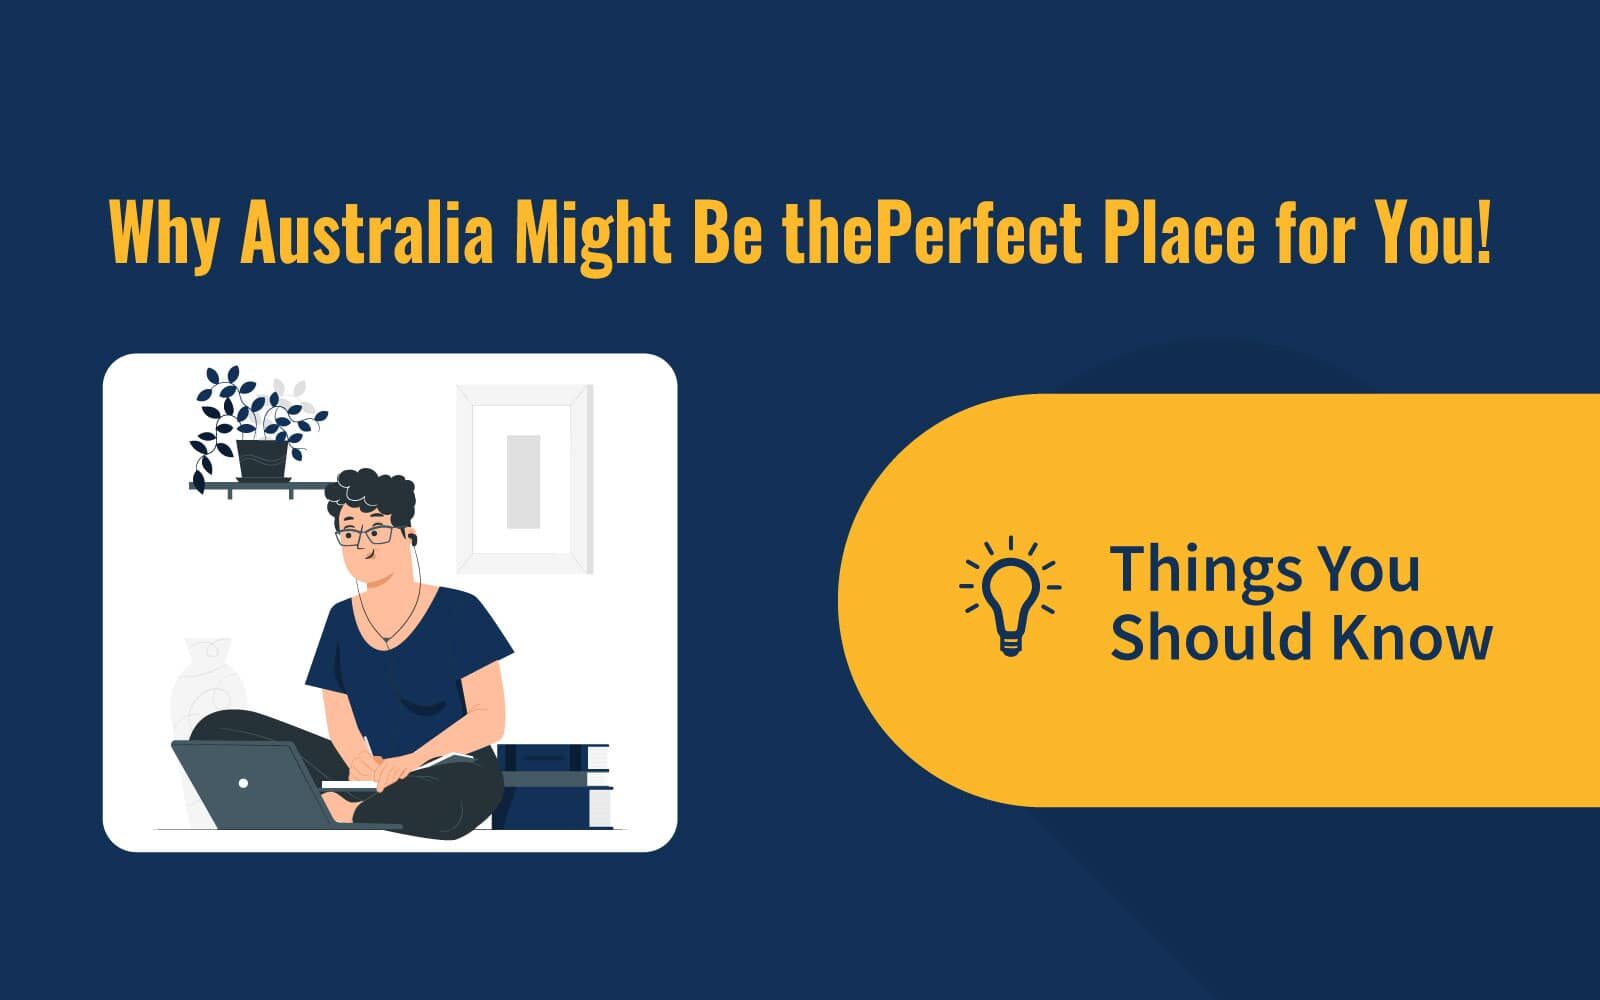 Why Australia Might Be the Perfect Place for You!